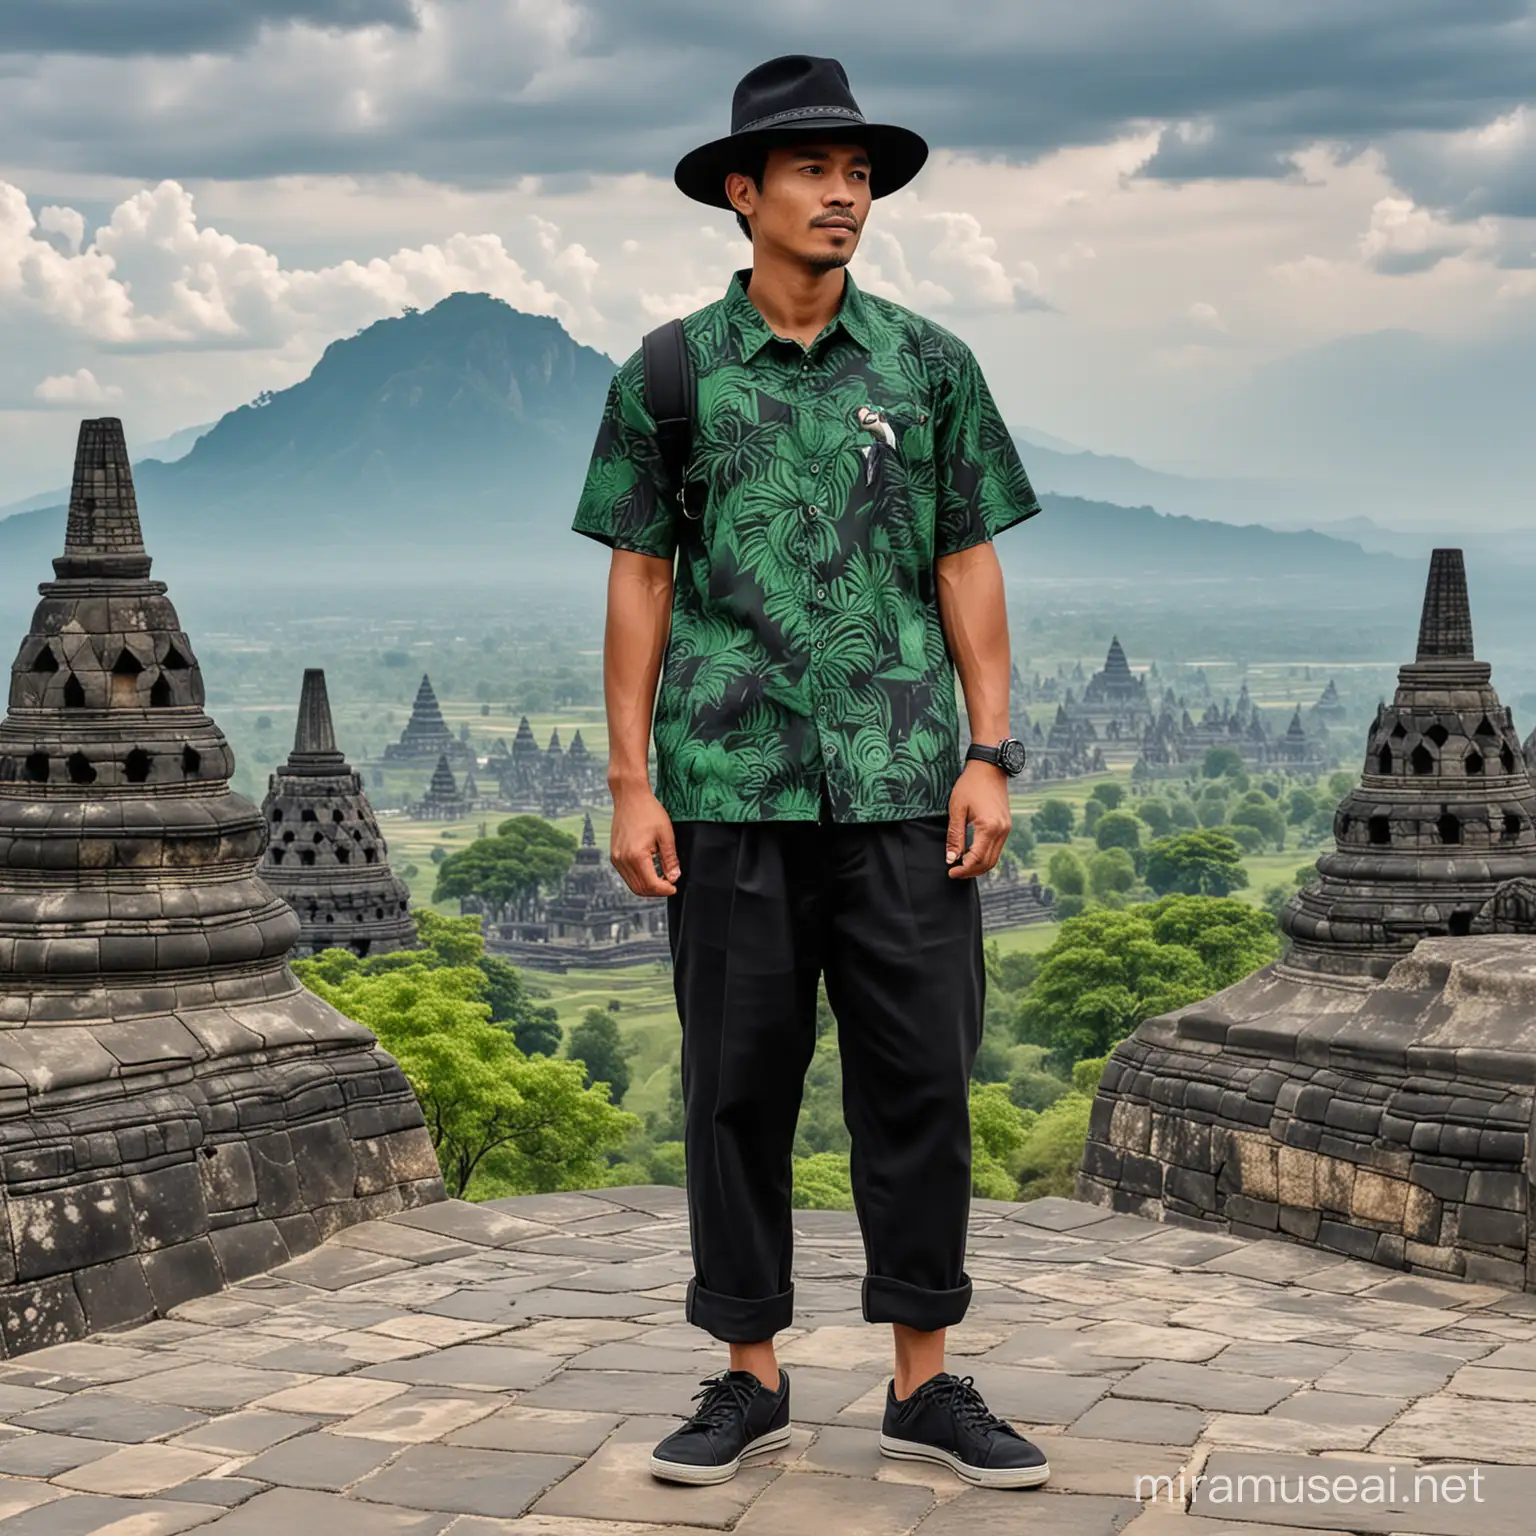 Modern Indonesian Man with Macaw at Borobudur Temple